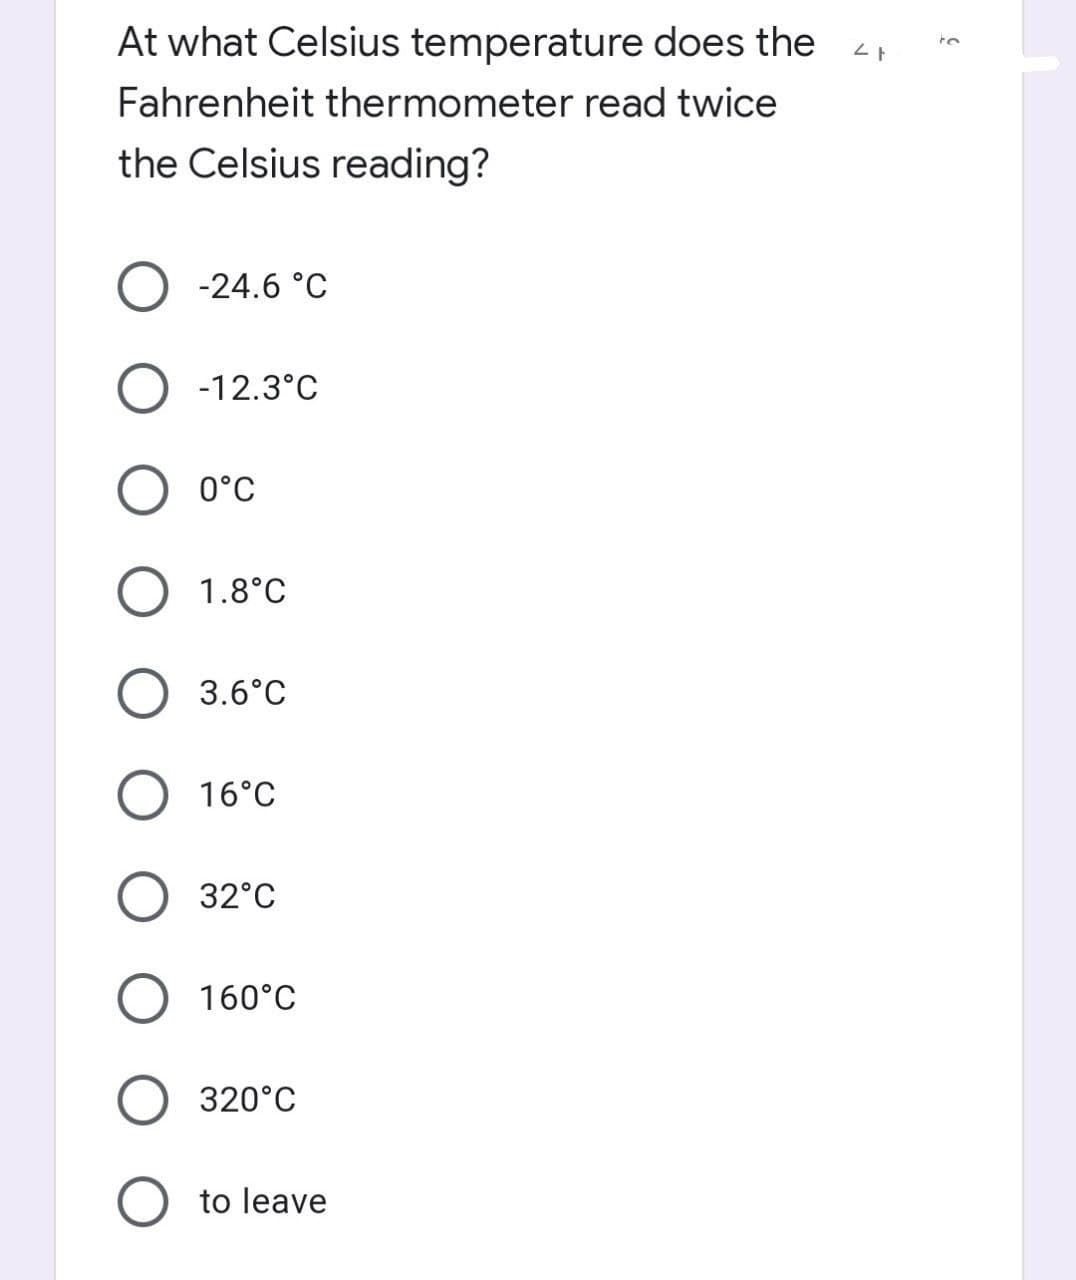 At what Celsius temperature does the
Fahrenheit thermometer read twice
the Celsius reading?
O -24.6 °C
O -12.3°C
0°C
1.8°C
3.6°C
O 16°C
32°C
O 160°C
320°C
O to leave
21
5